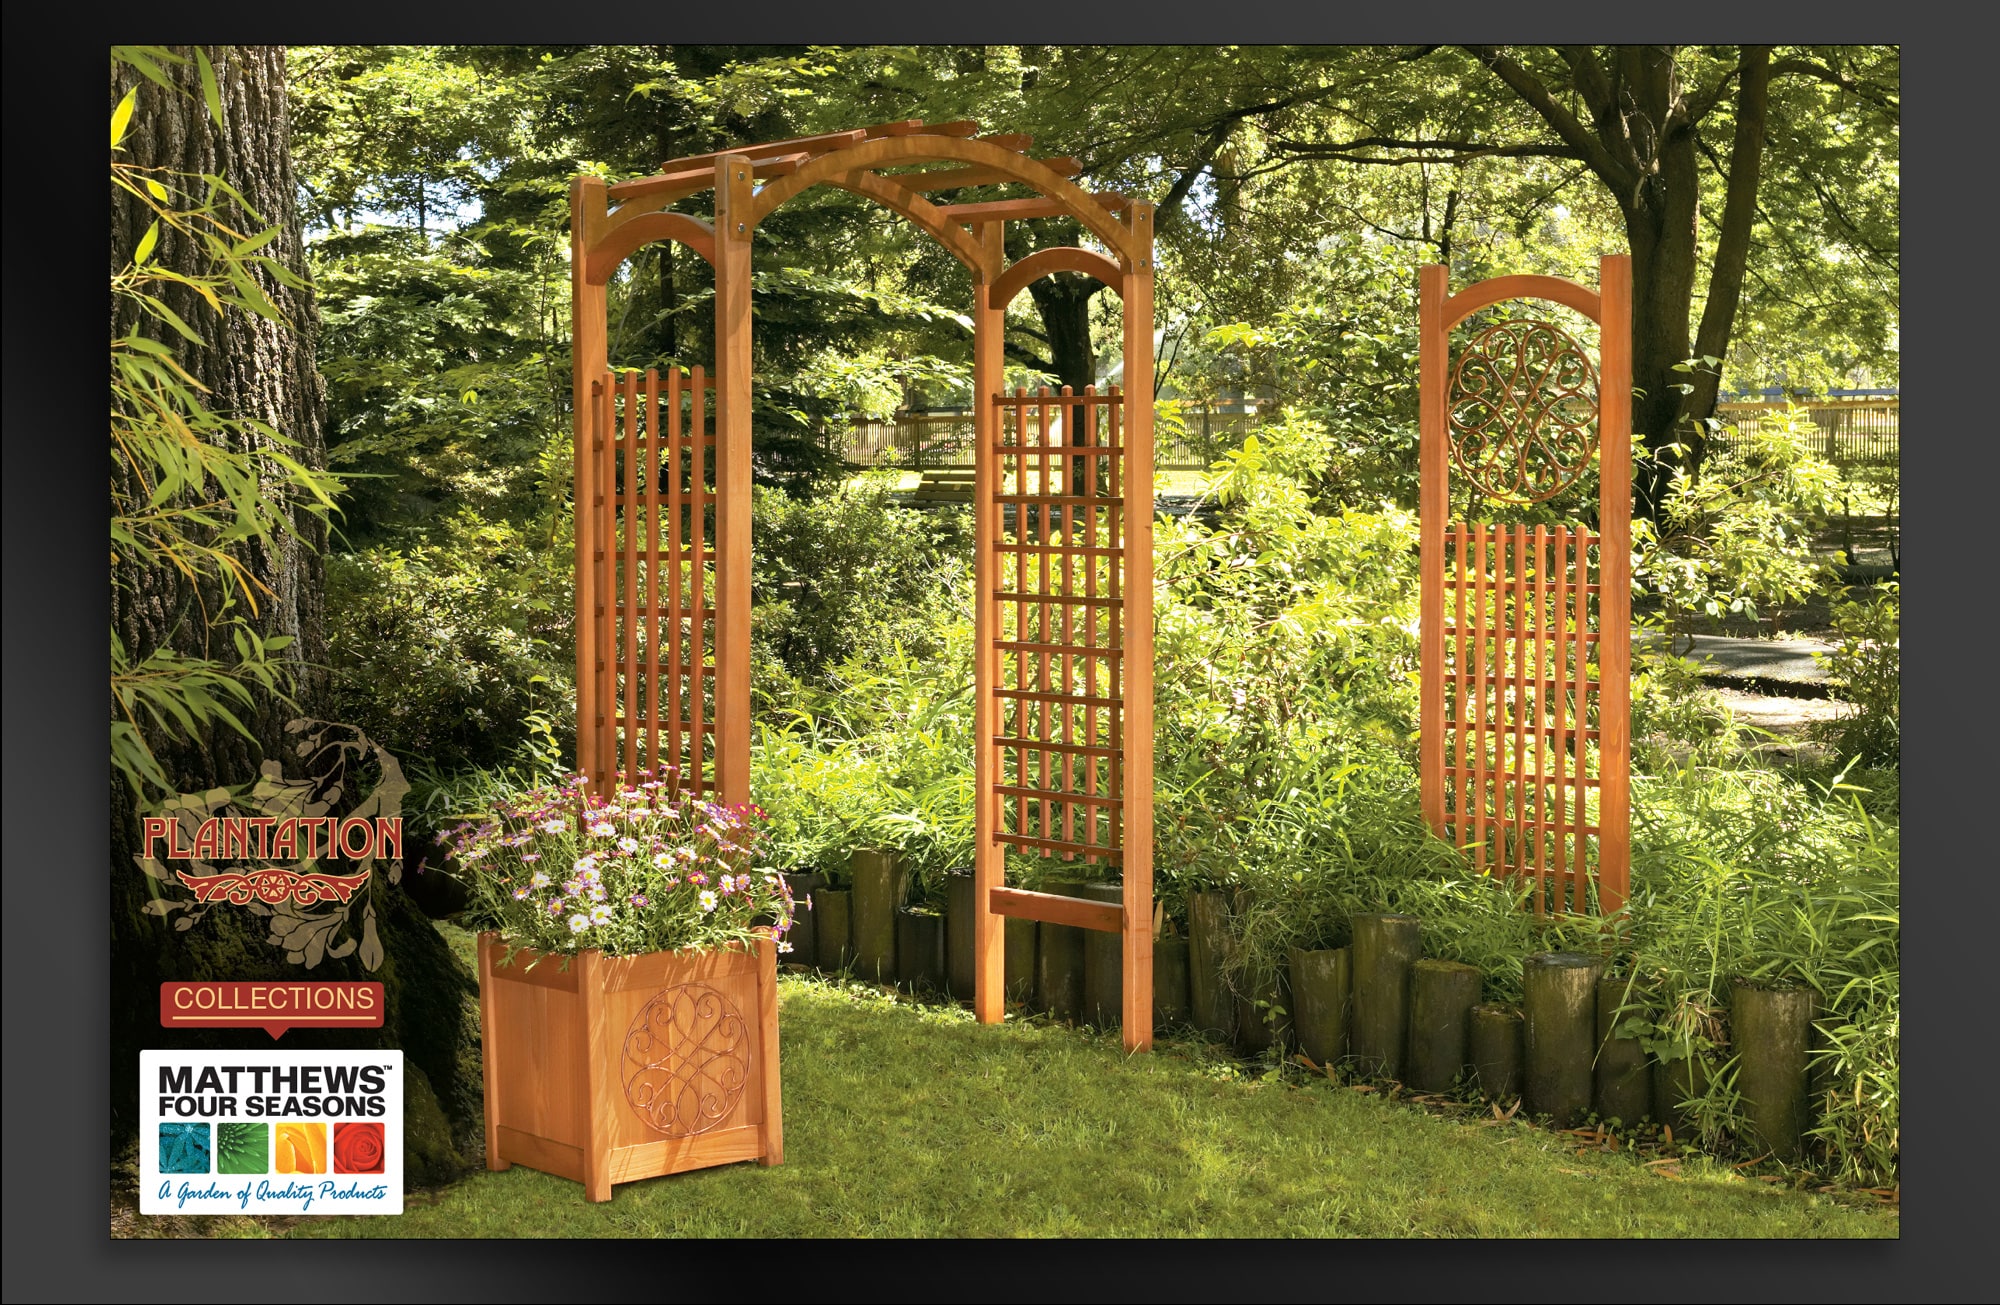  USA, Box, Arbor and Trellis In-Store Banners for The Plantation Collections  